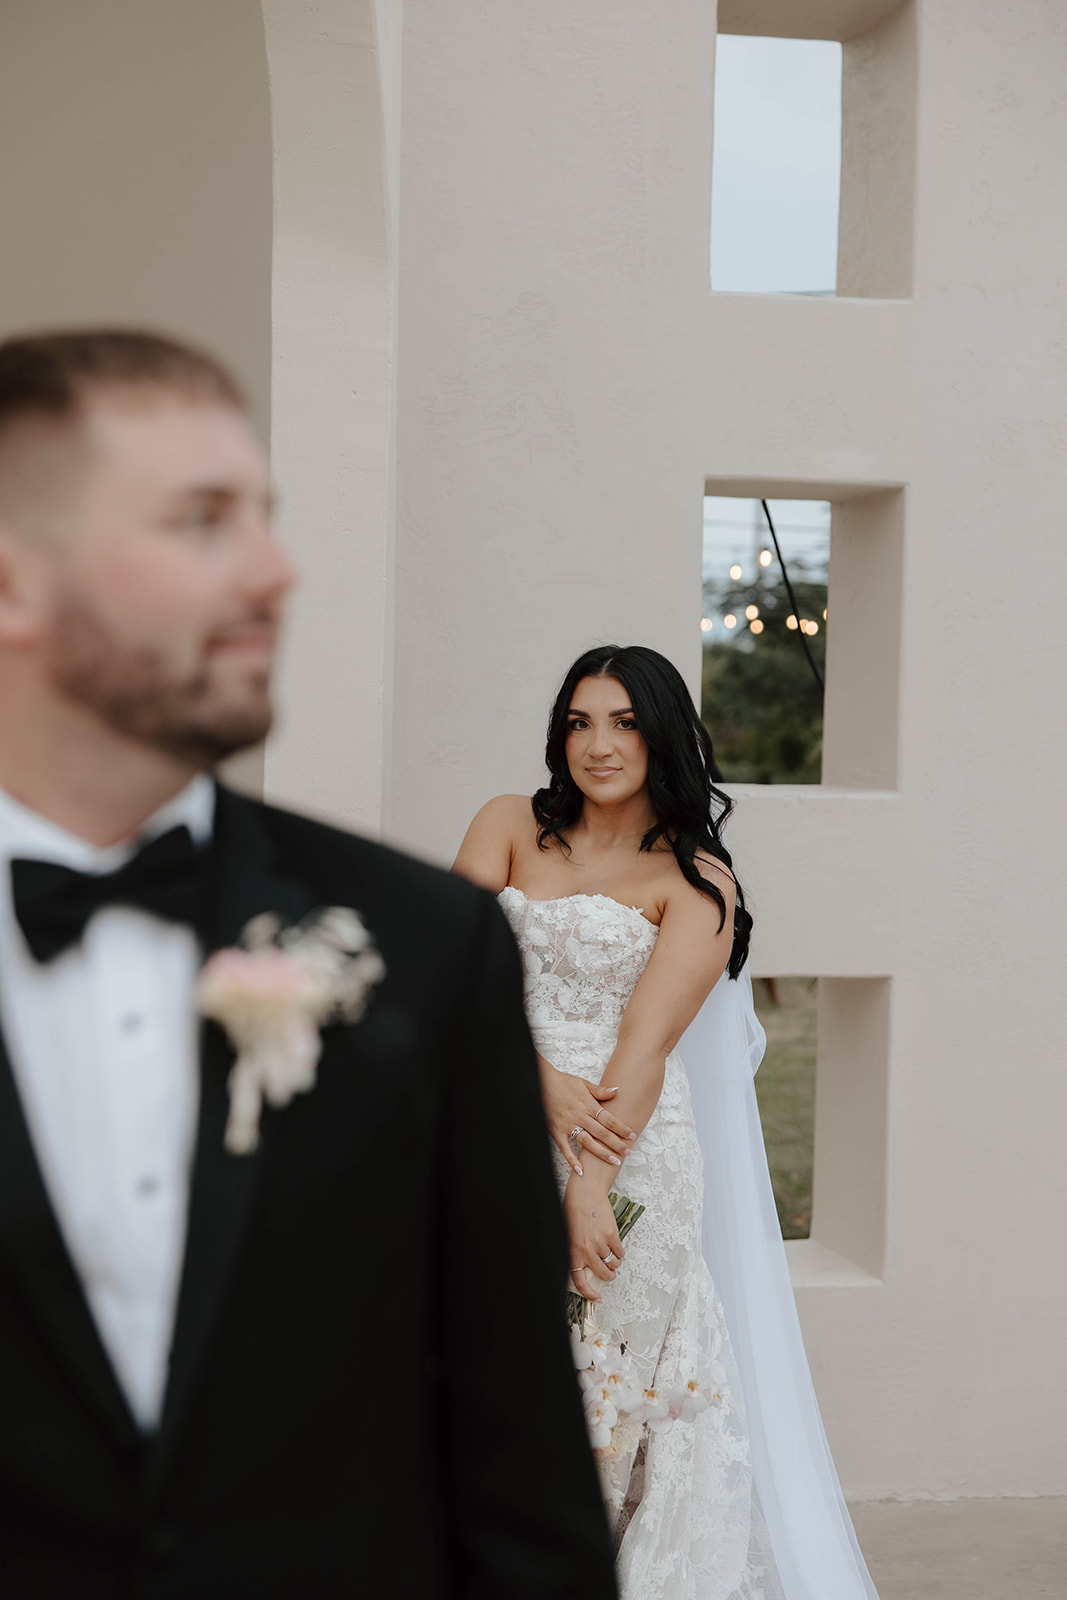 A newlywed couple walking hand in hand with a joyful expression as wedding guests look on.